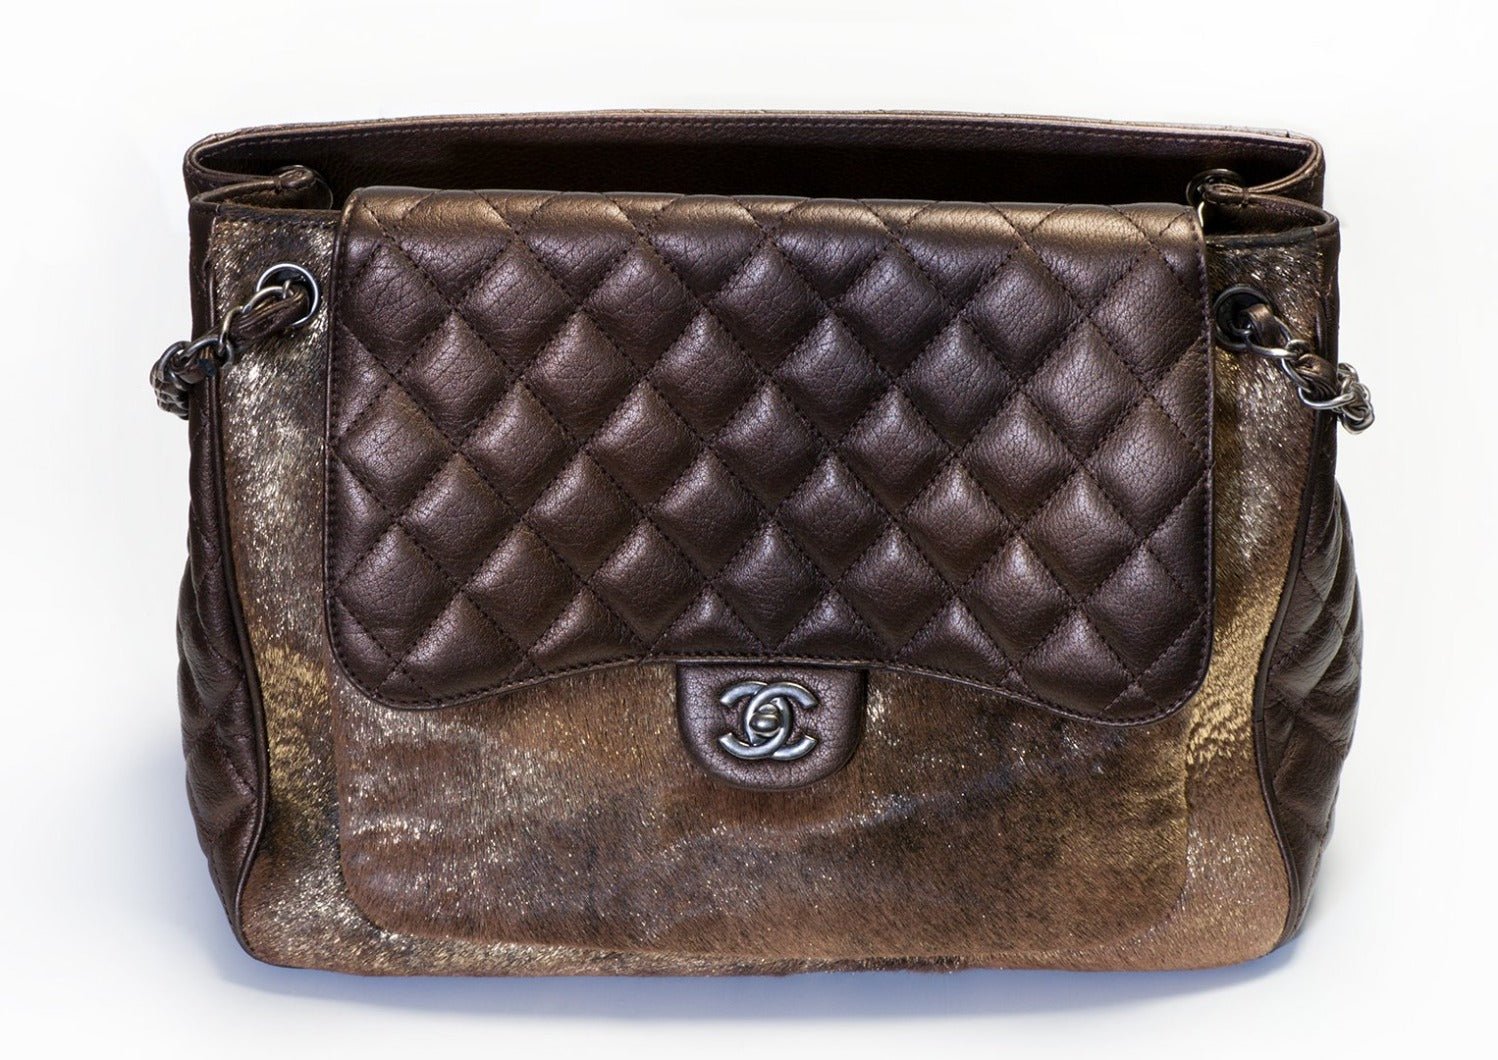 CHANEL Paris 2015 Brown Ombré Quilted Leather Mink Fur Tote Bag - DSF Antique Jewelry